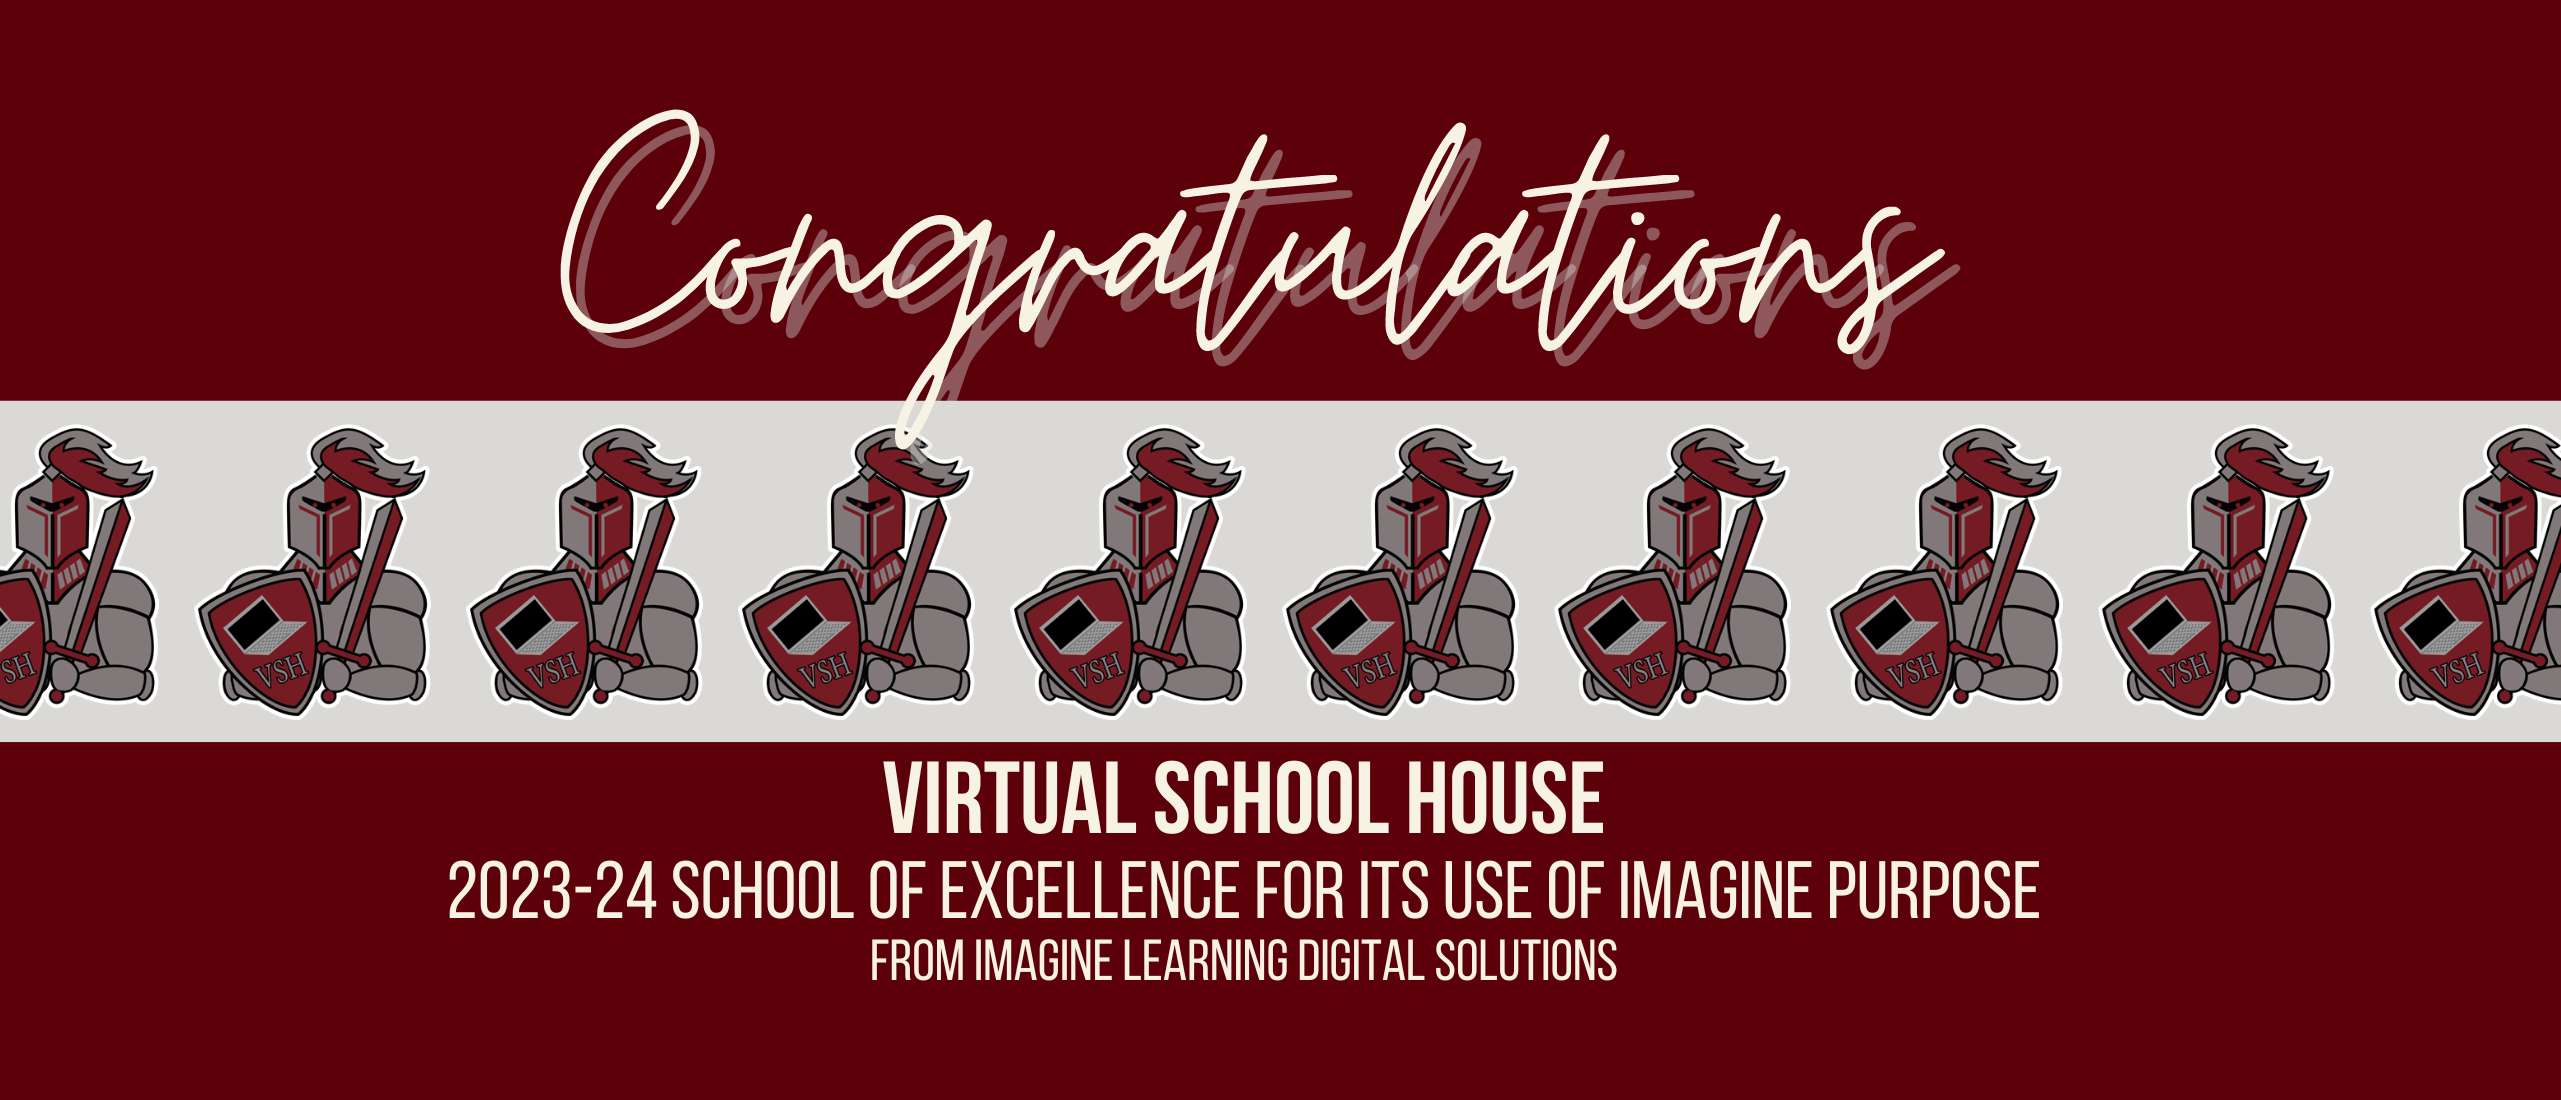 congratulations virtual school house - 2023-24 school of excellence for its use of imagine purpose from imagine learning digital soluations